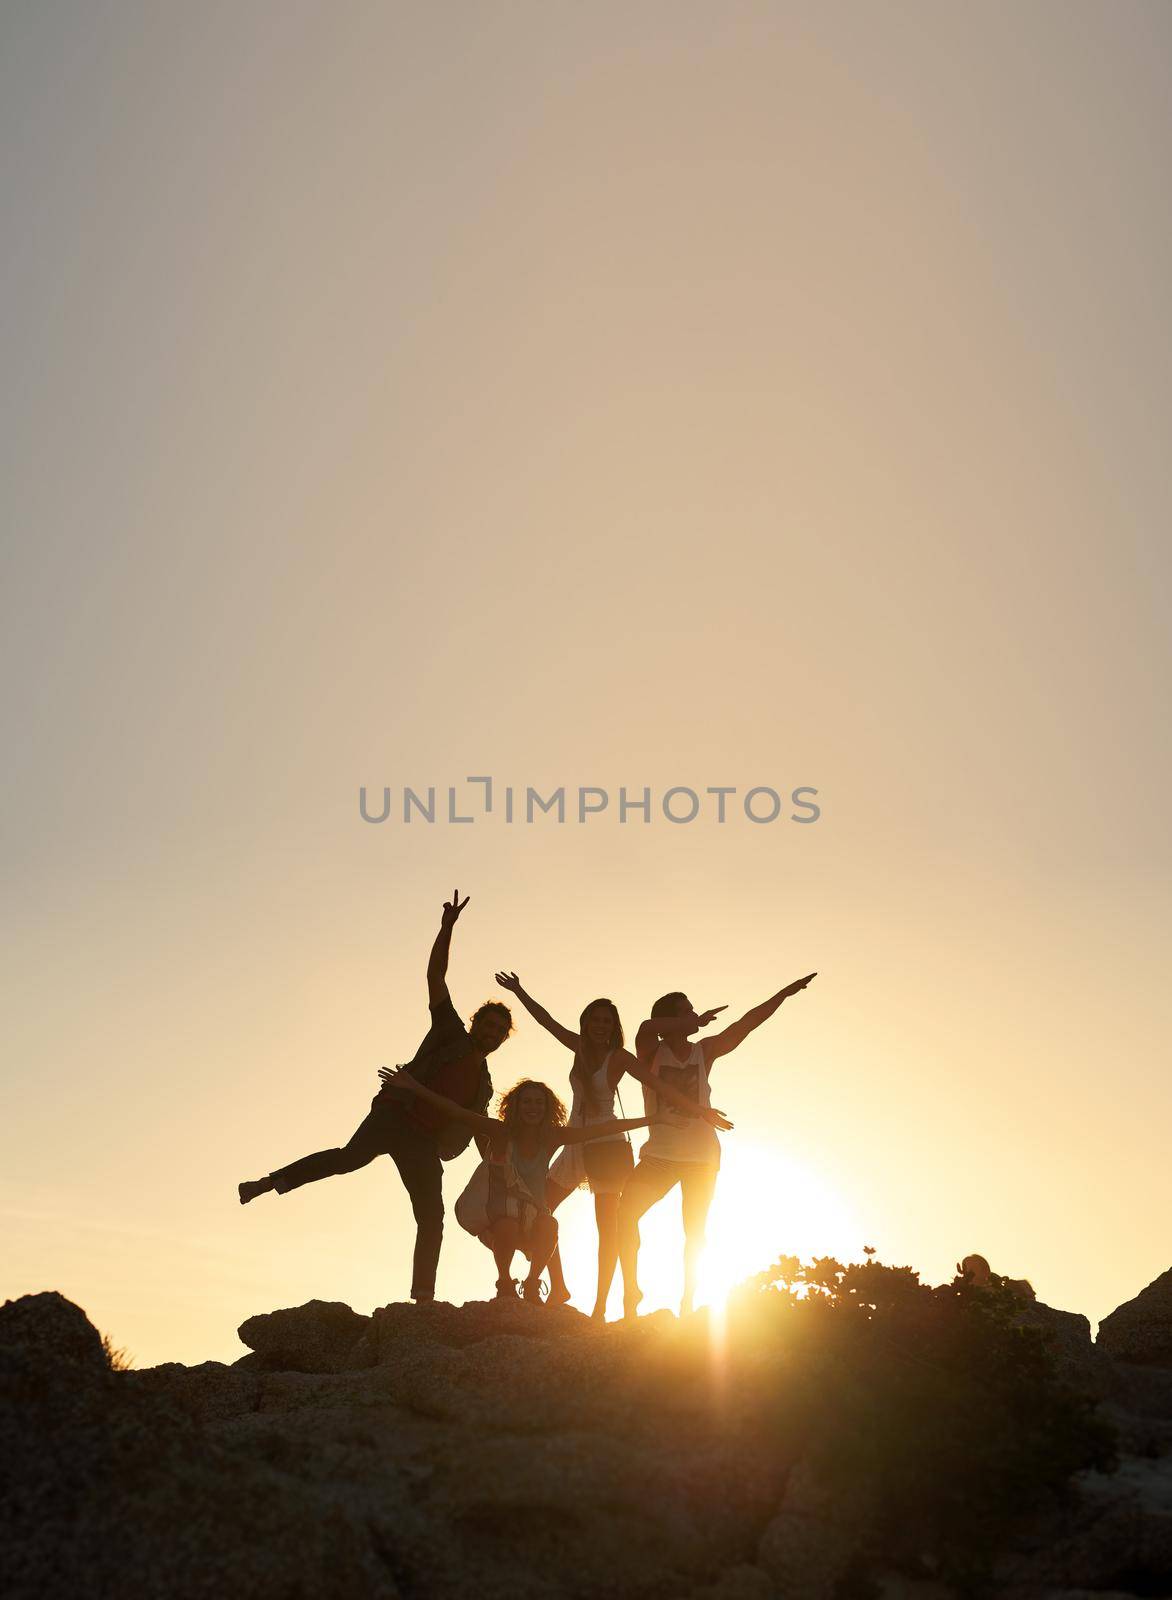 Group of friends posing standing on rocks at sunset having fun summer vacation lifestyle celebrating friendship.